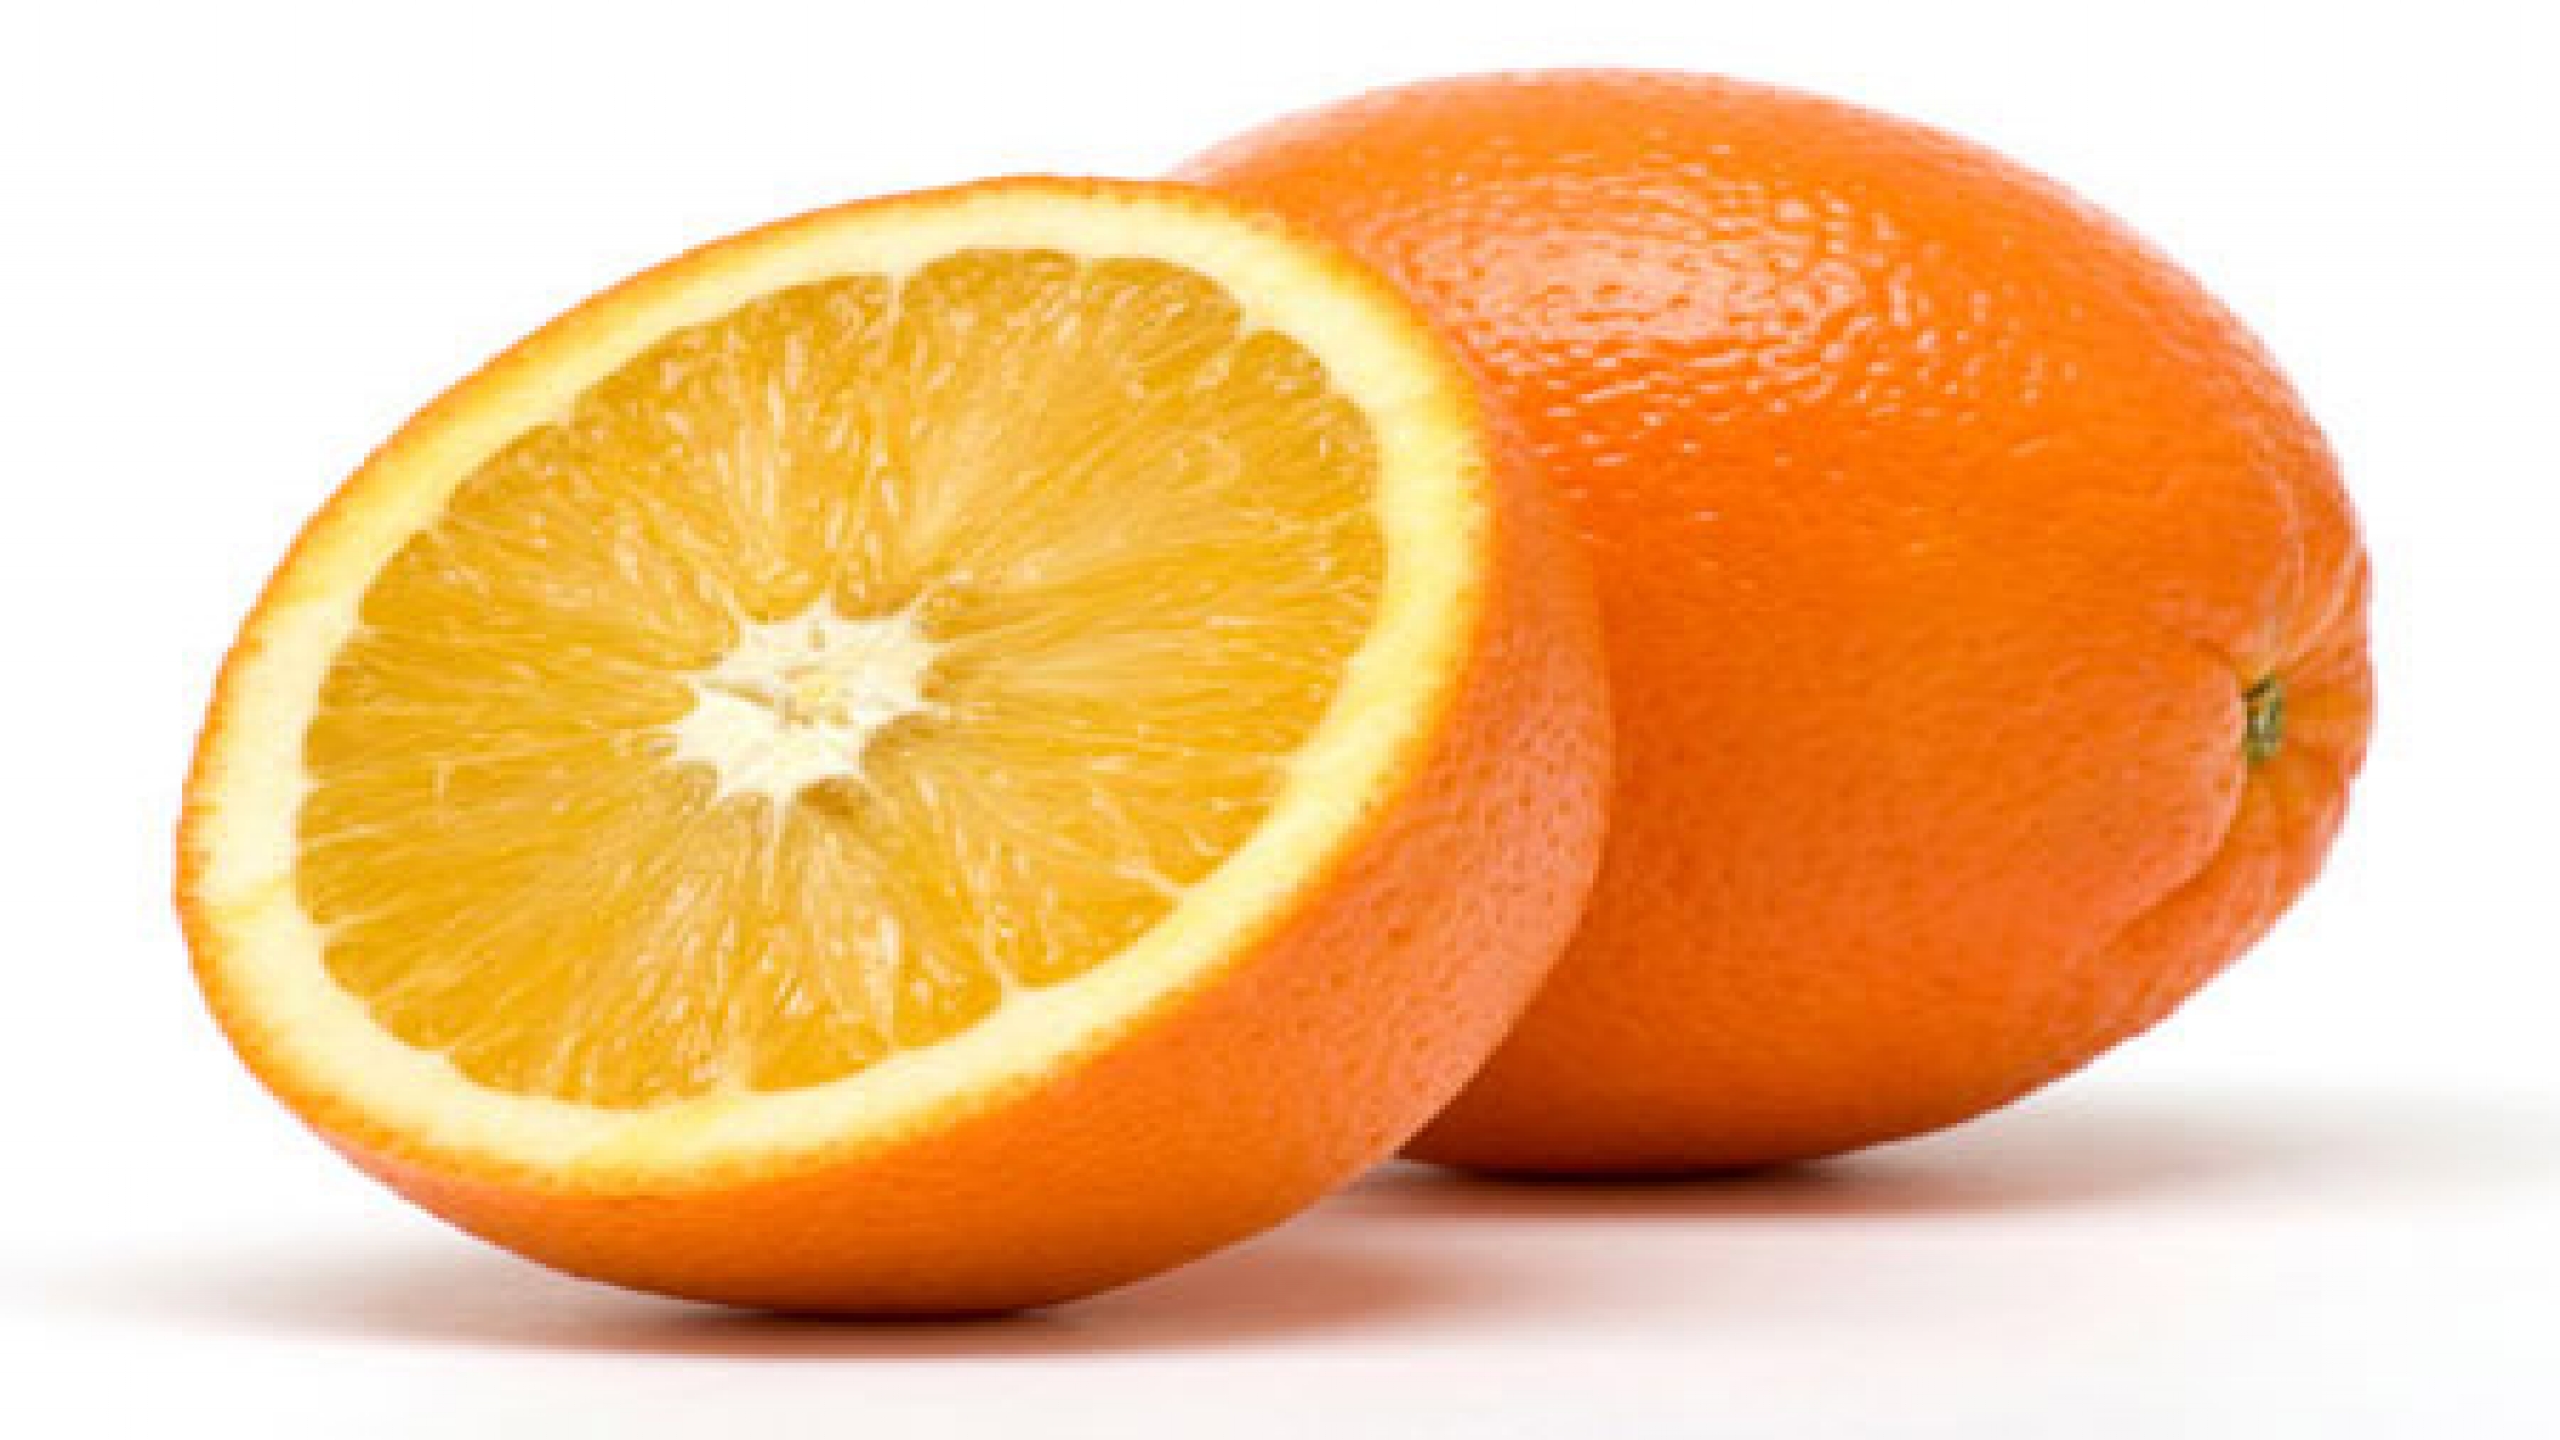 Introducing Pictures Of Orange Fruits Pics #20405